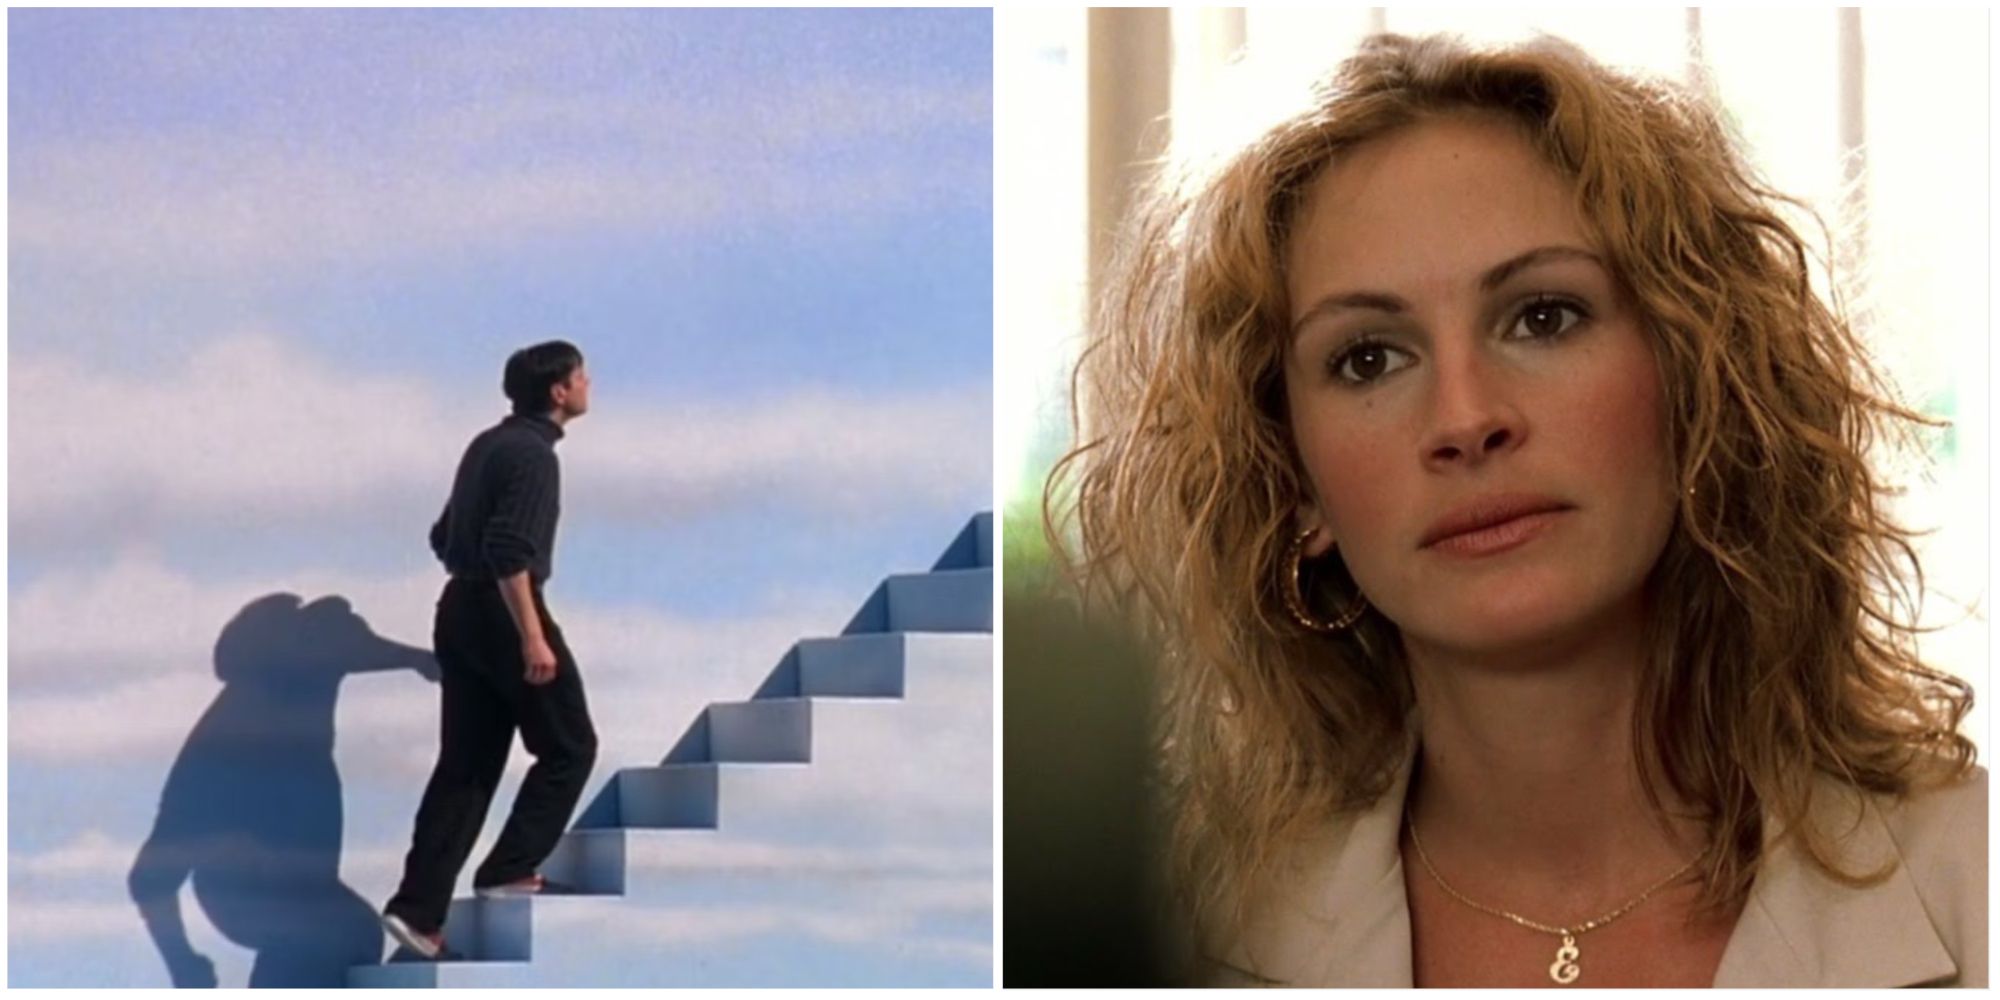 The Truman Show and Erin Brockovich